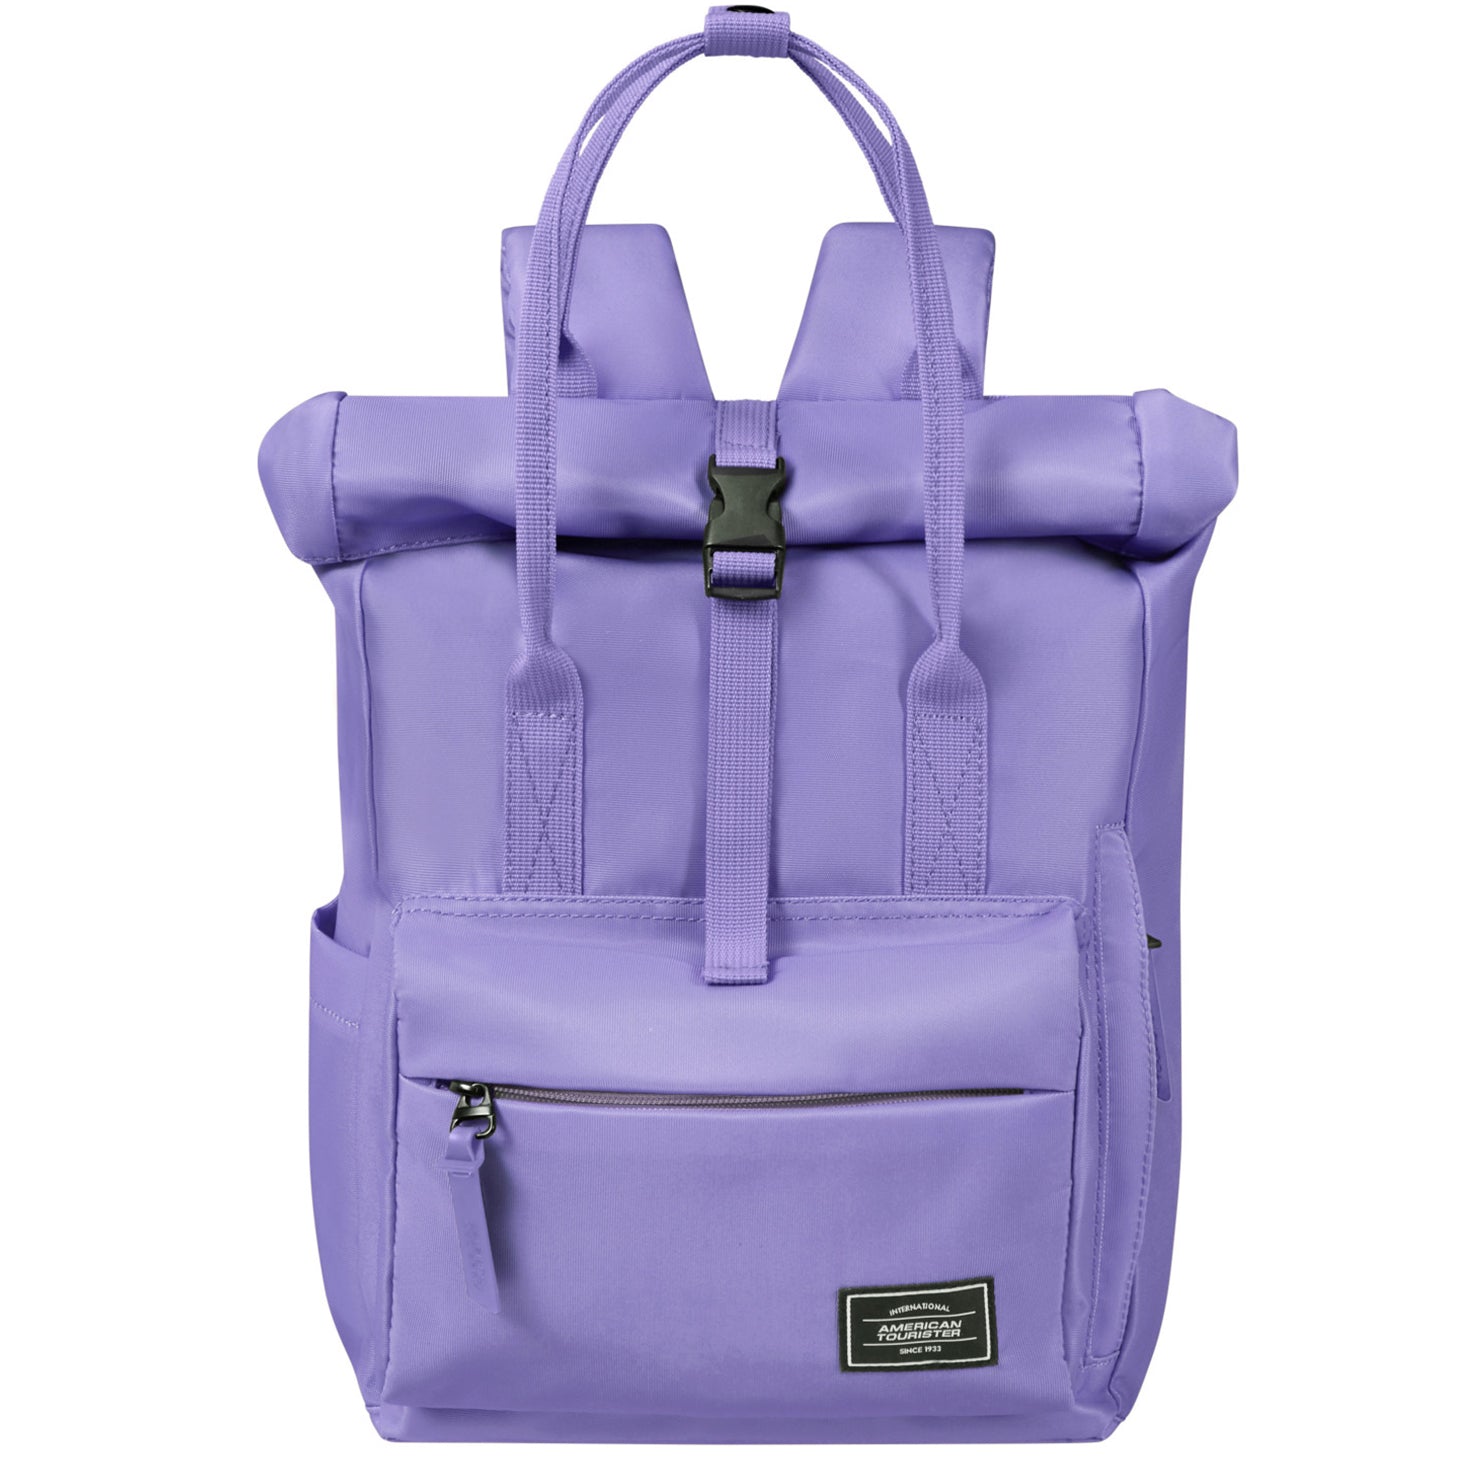 American Tourister Urban Groove City Rucksack 36 cm - Soft Lilac